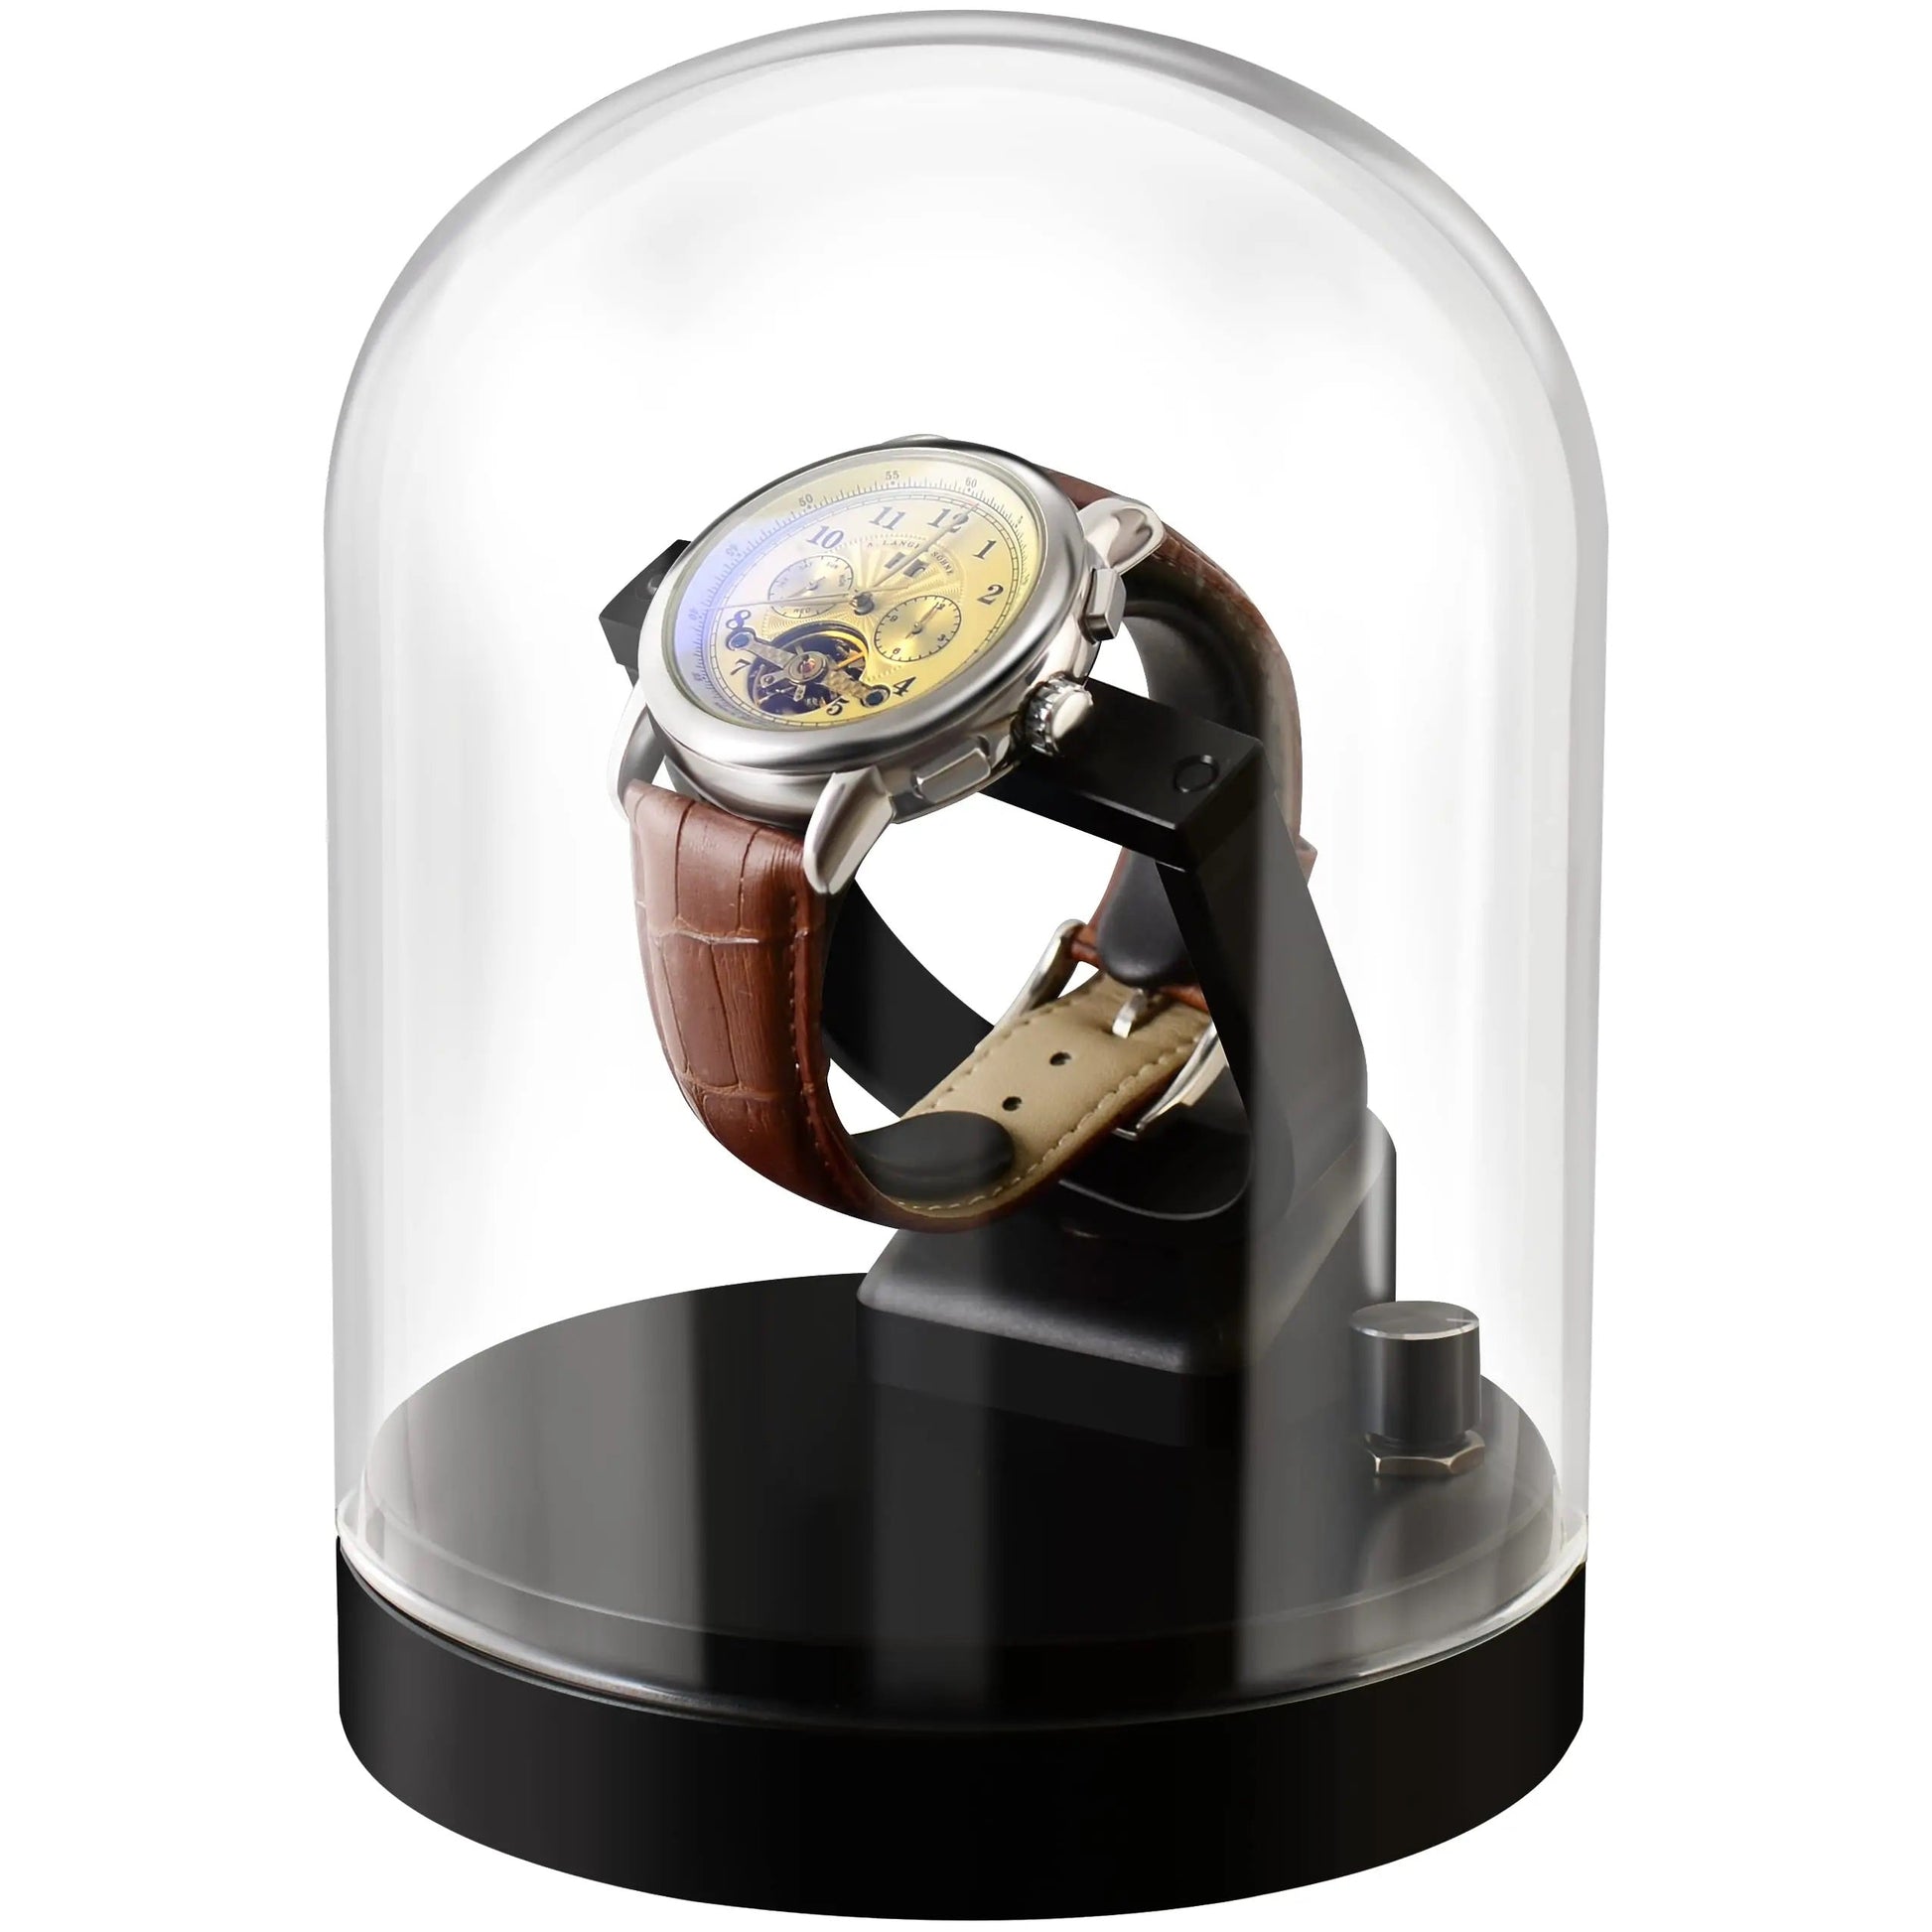 ALDO Décor > Watches Black Luxury Automatic Space Age Orbiting Gyroscope Design Watch Winder Fine Stand Case With USB Power Adapter